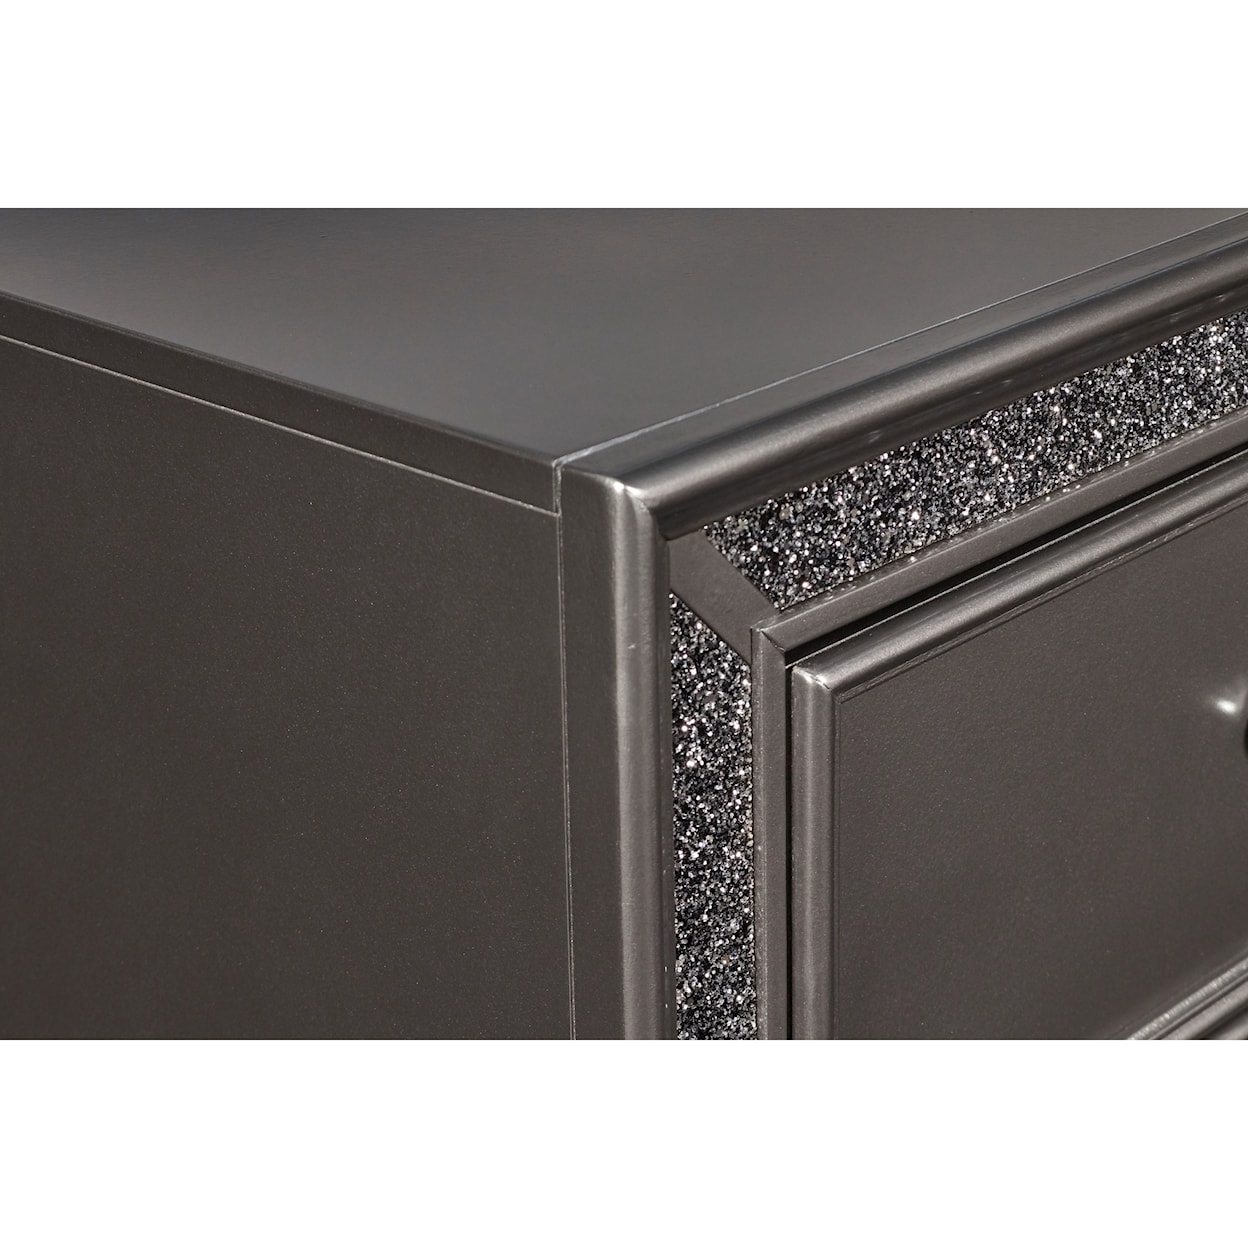 New Classic Furniture Park Imperial Nightstand